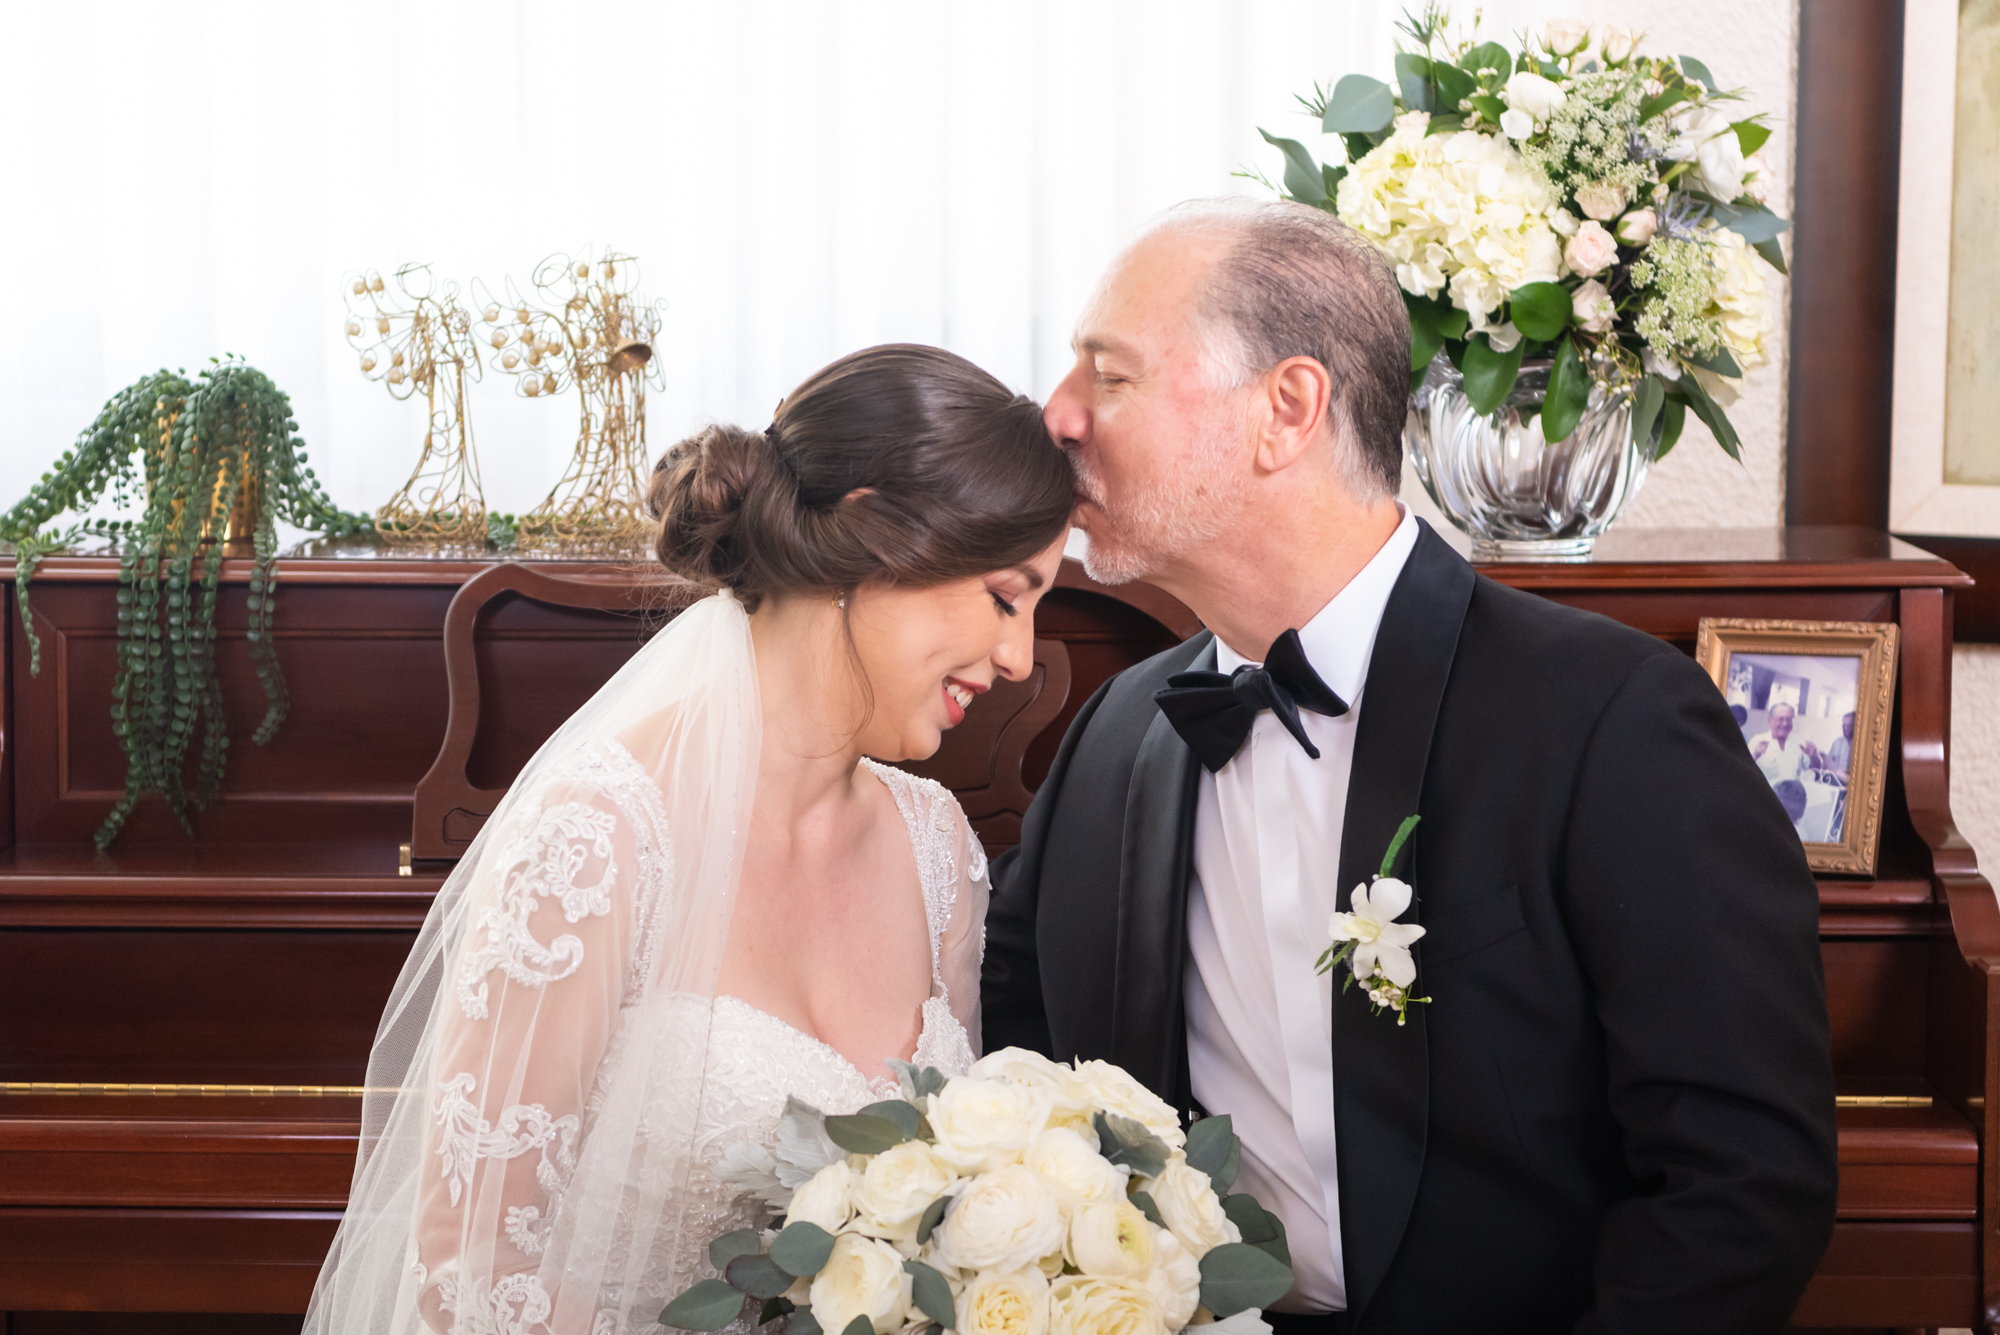 Bride's dad kissing her in the forehead